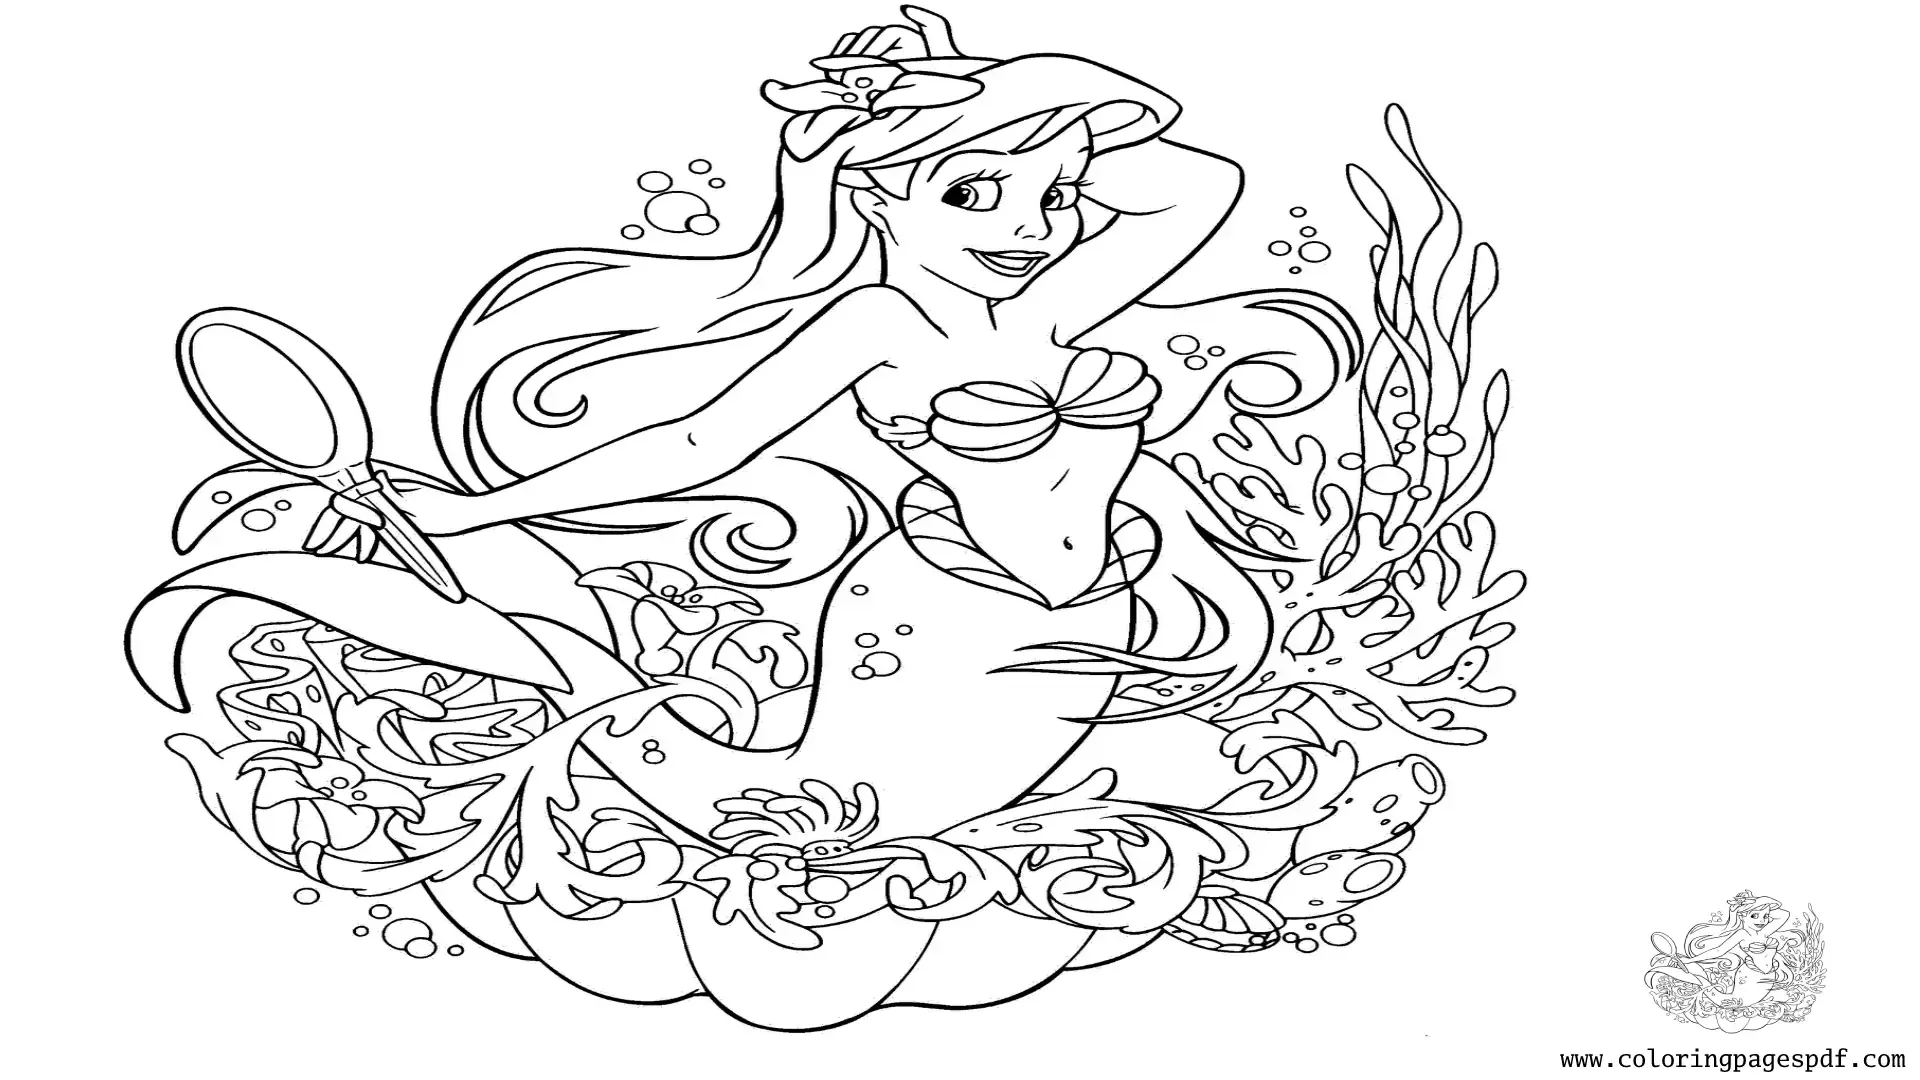 Coloring Page Of Ariel Under The Sea